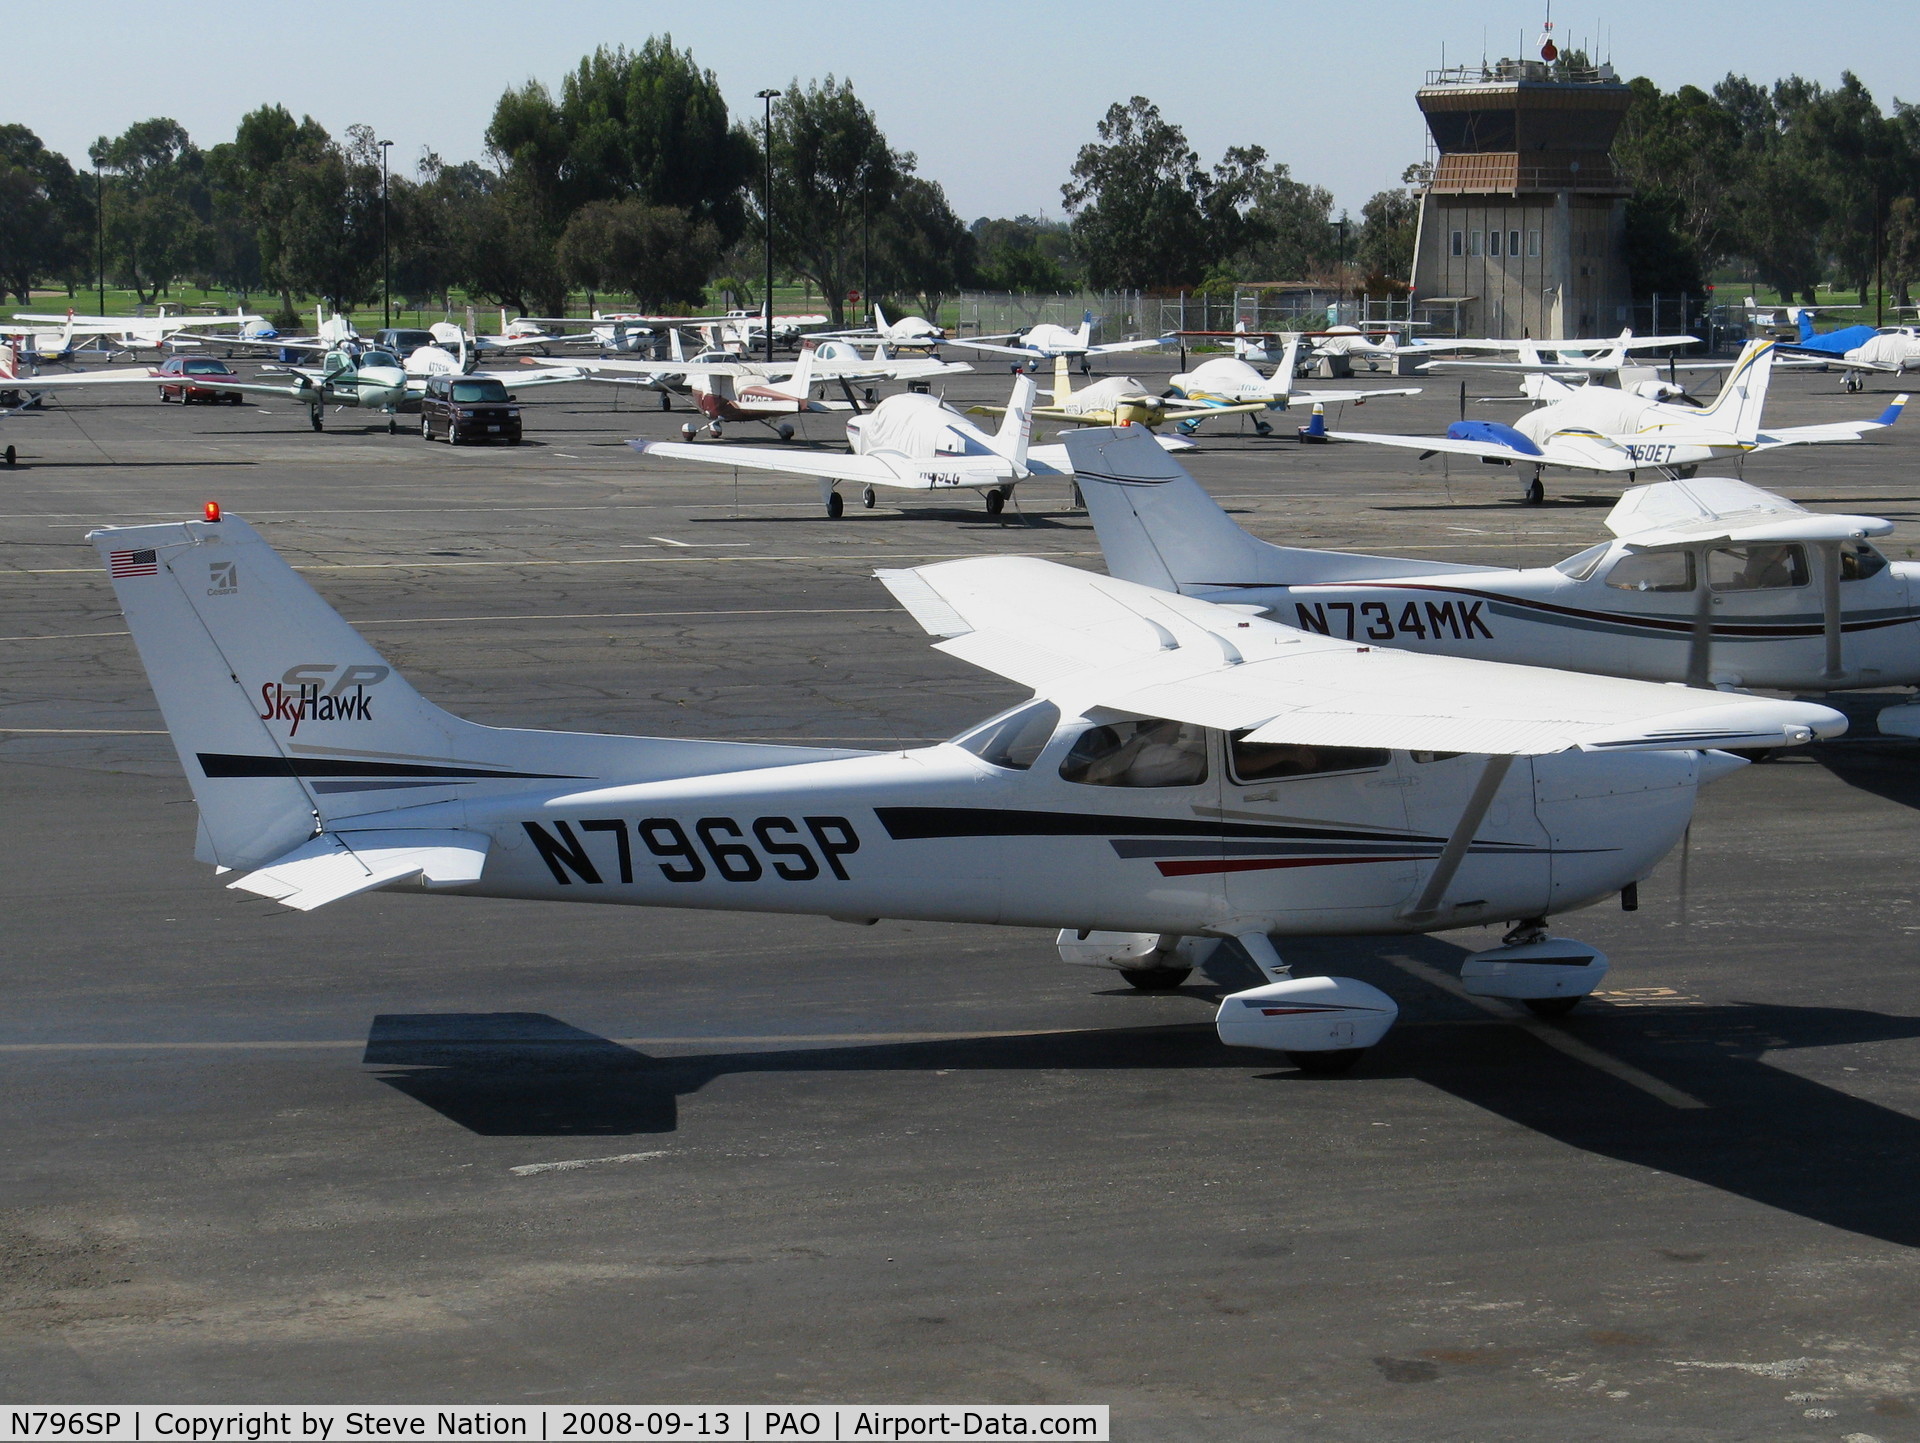 N796SP, 2001 Cessna 172S C/N 172S8720, N796SP and N734MK running-up engines while waiting OK to taxy